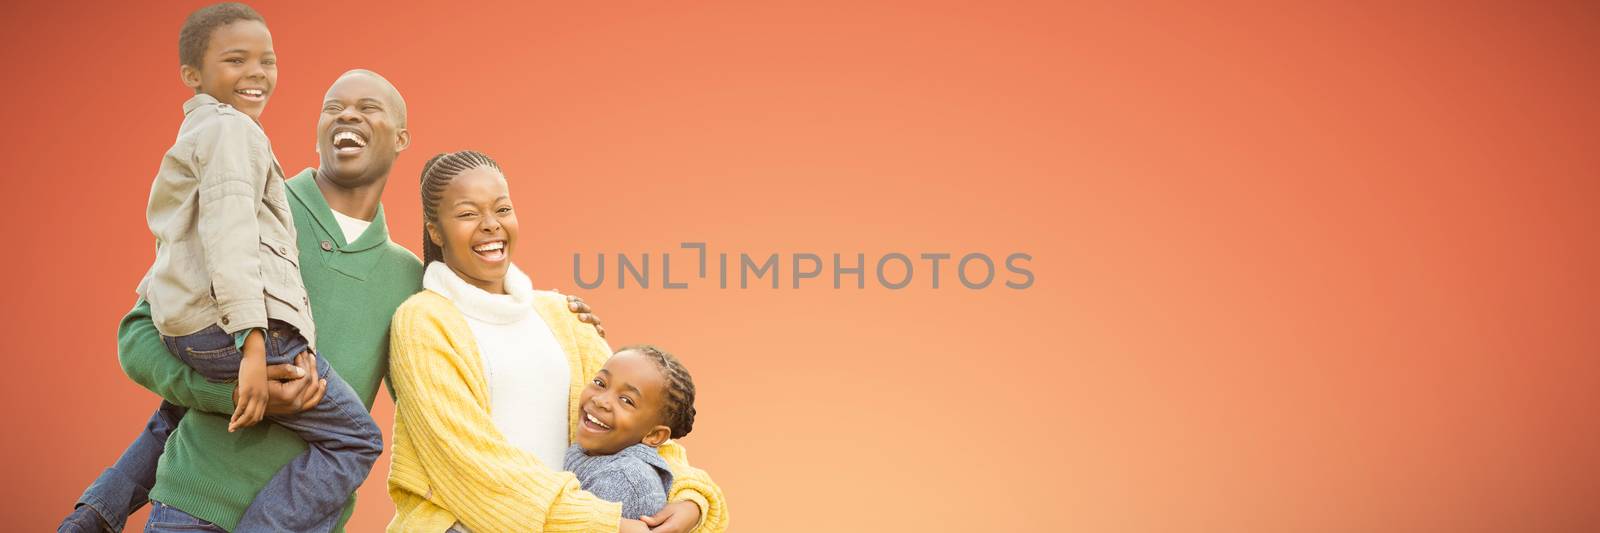 Composite image of portrait of a smiling young family laughing by Wavebreakmedia